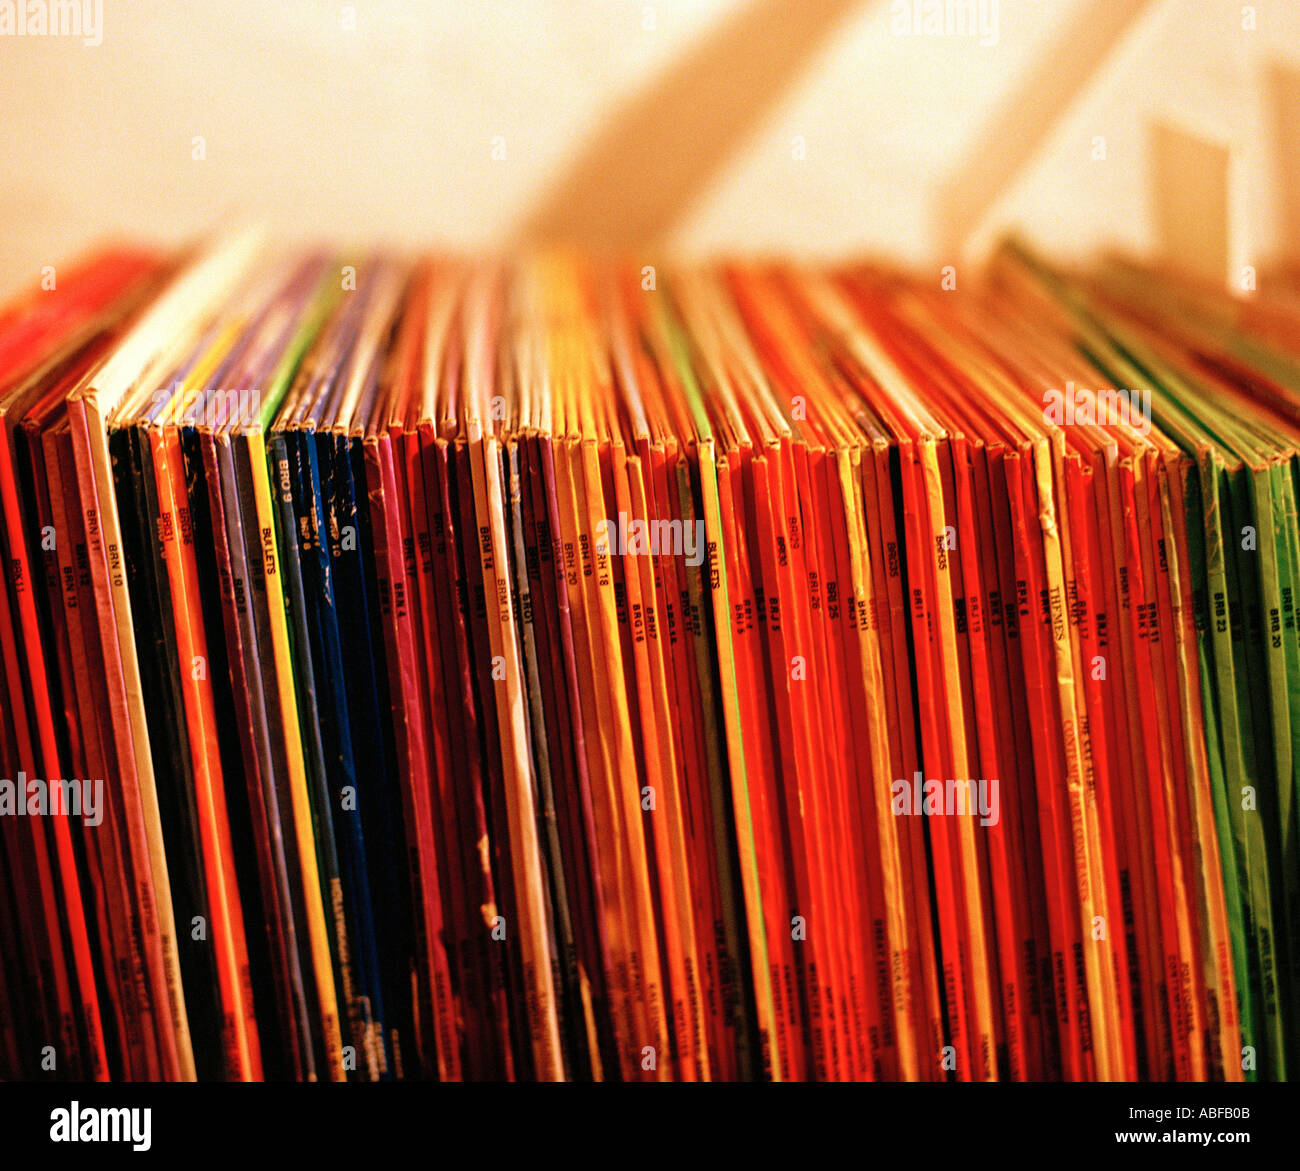 Record spines Stock Photo